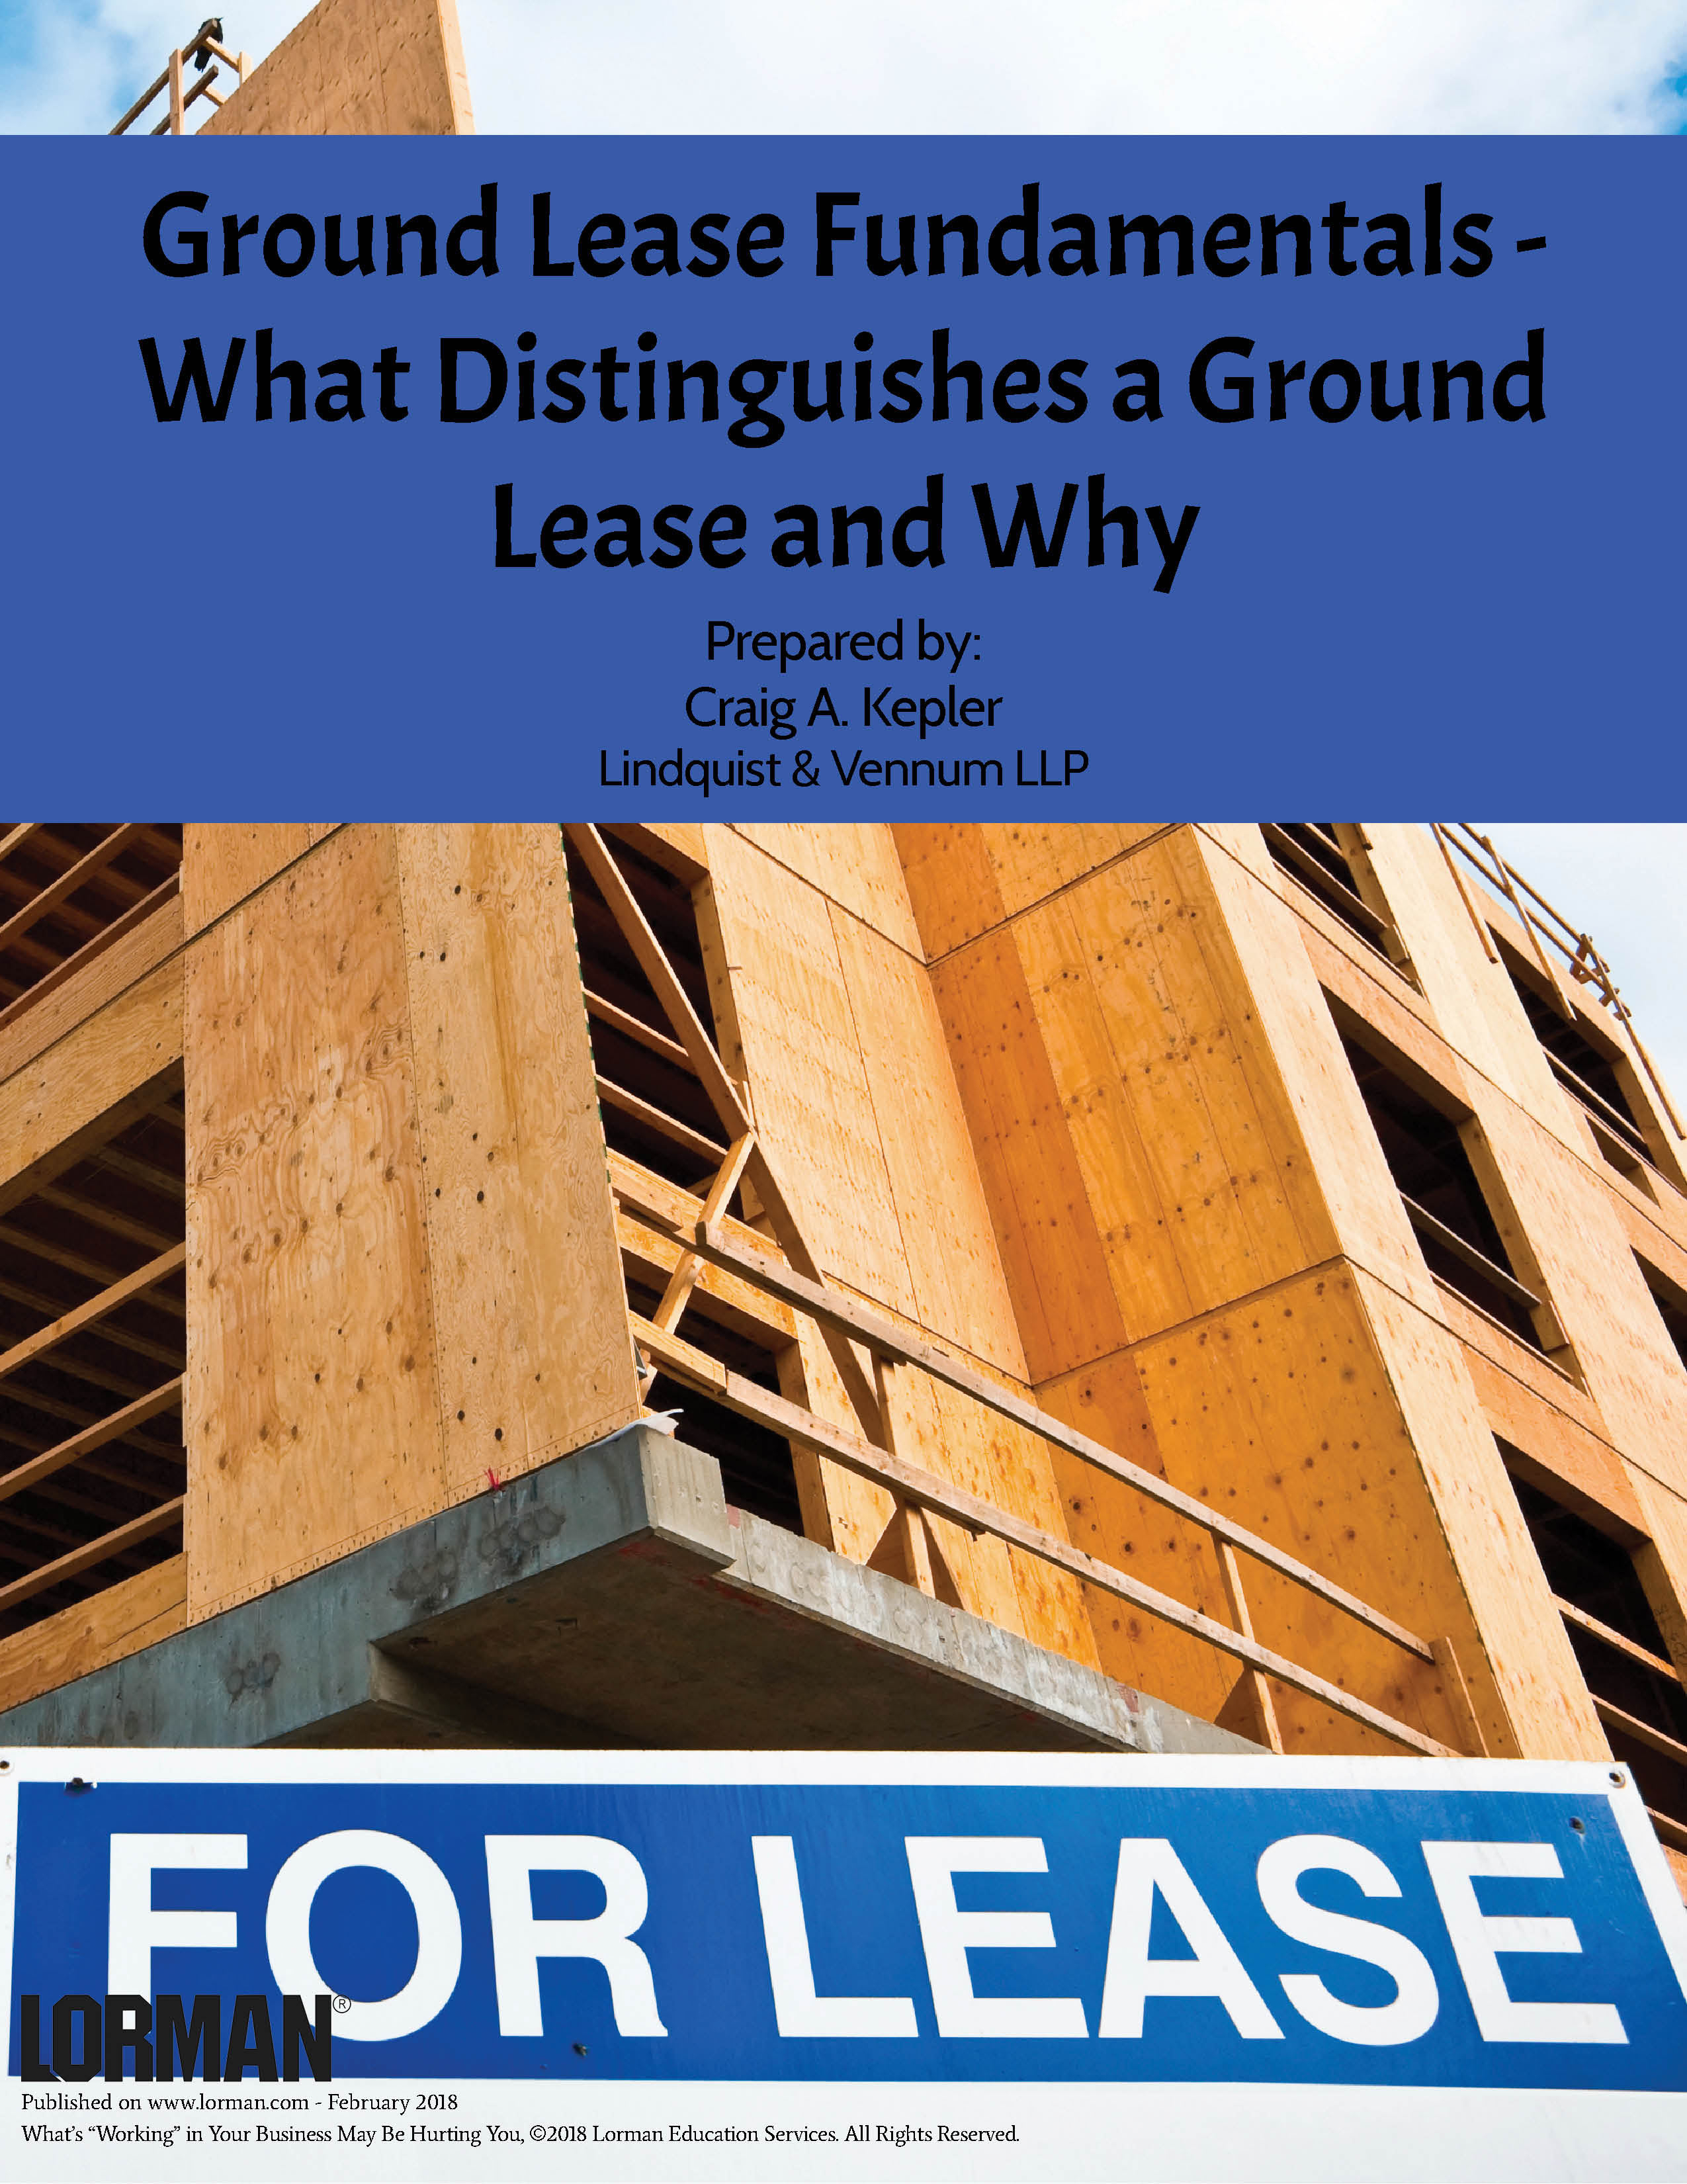 Ground Lease Fundamentals - What Distinguishes a Ground Lease and Why